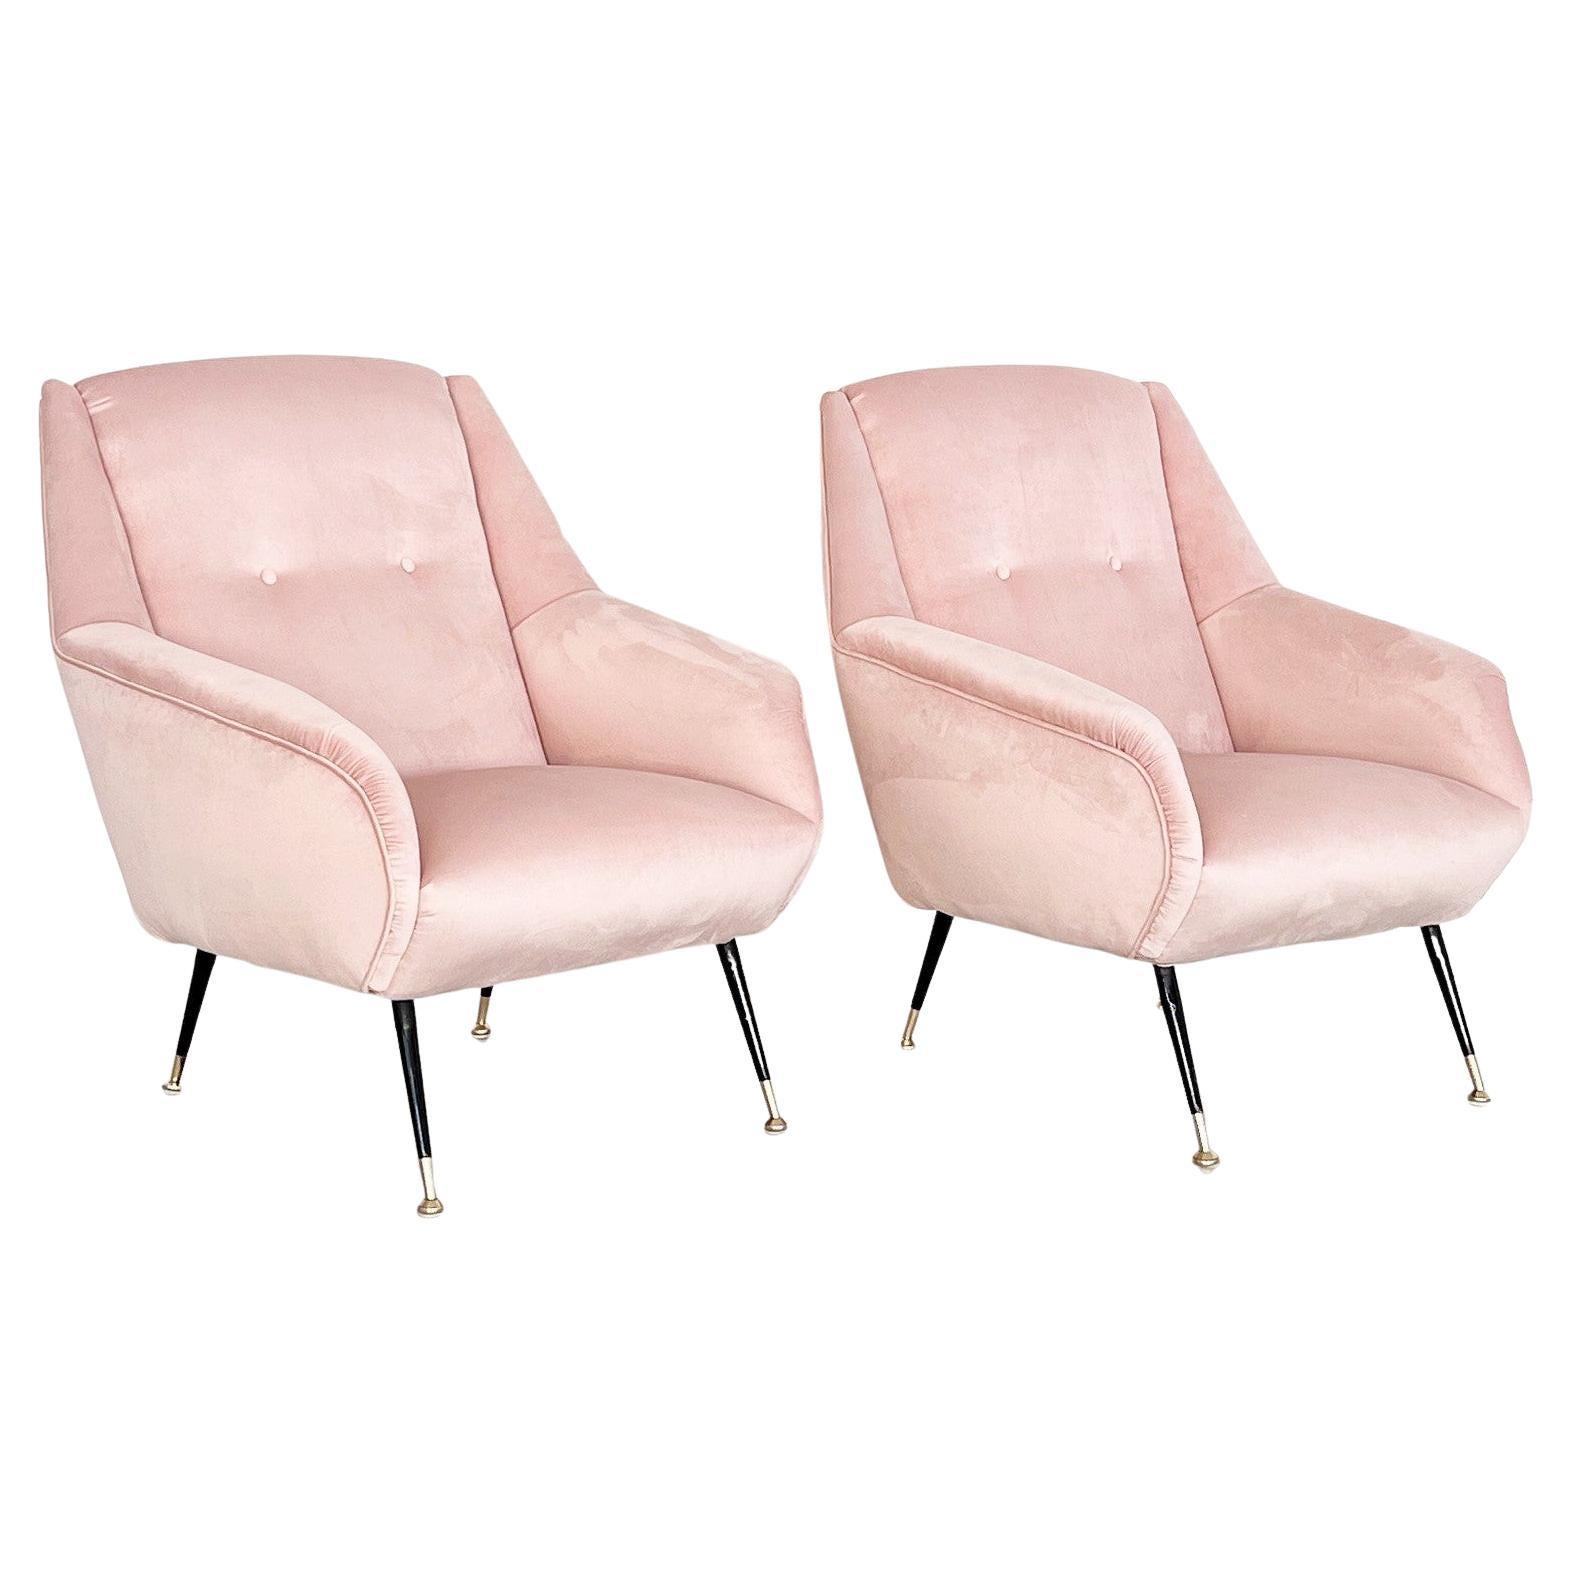 Italian Midcentury Armchairs in Soft Pink Velvet and Brass Tips, 1950s